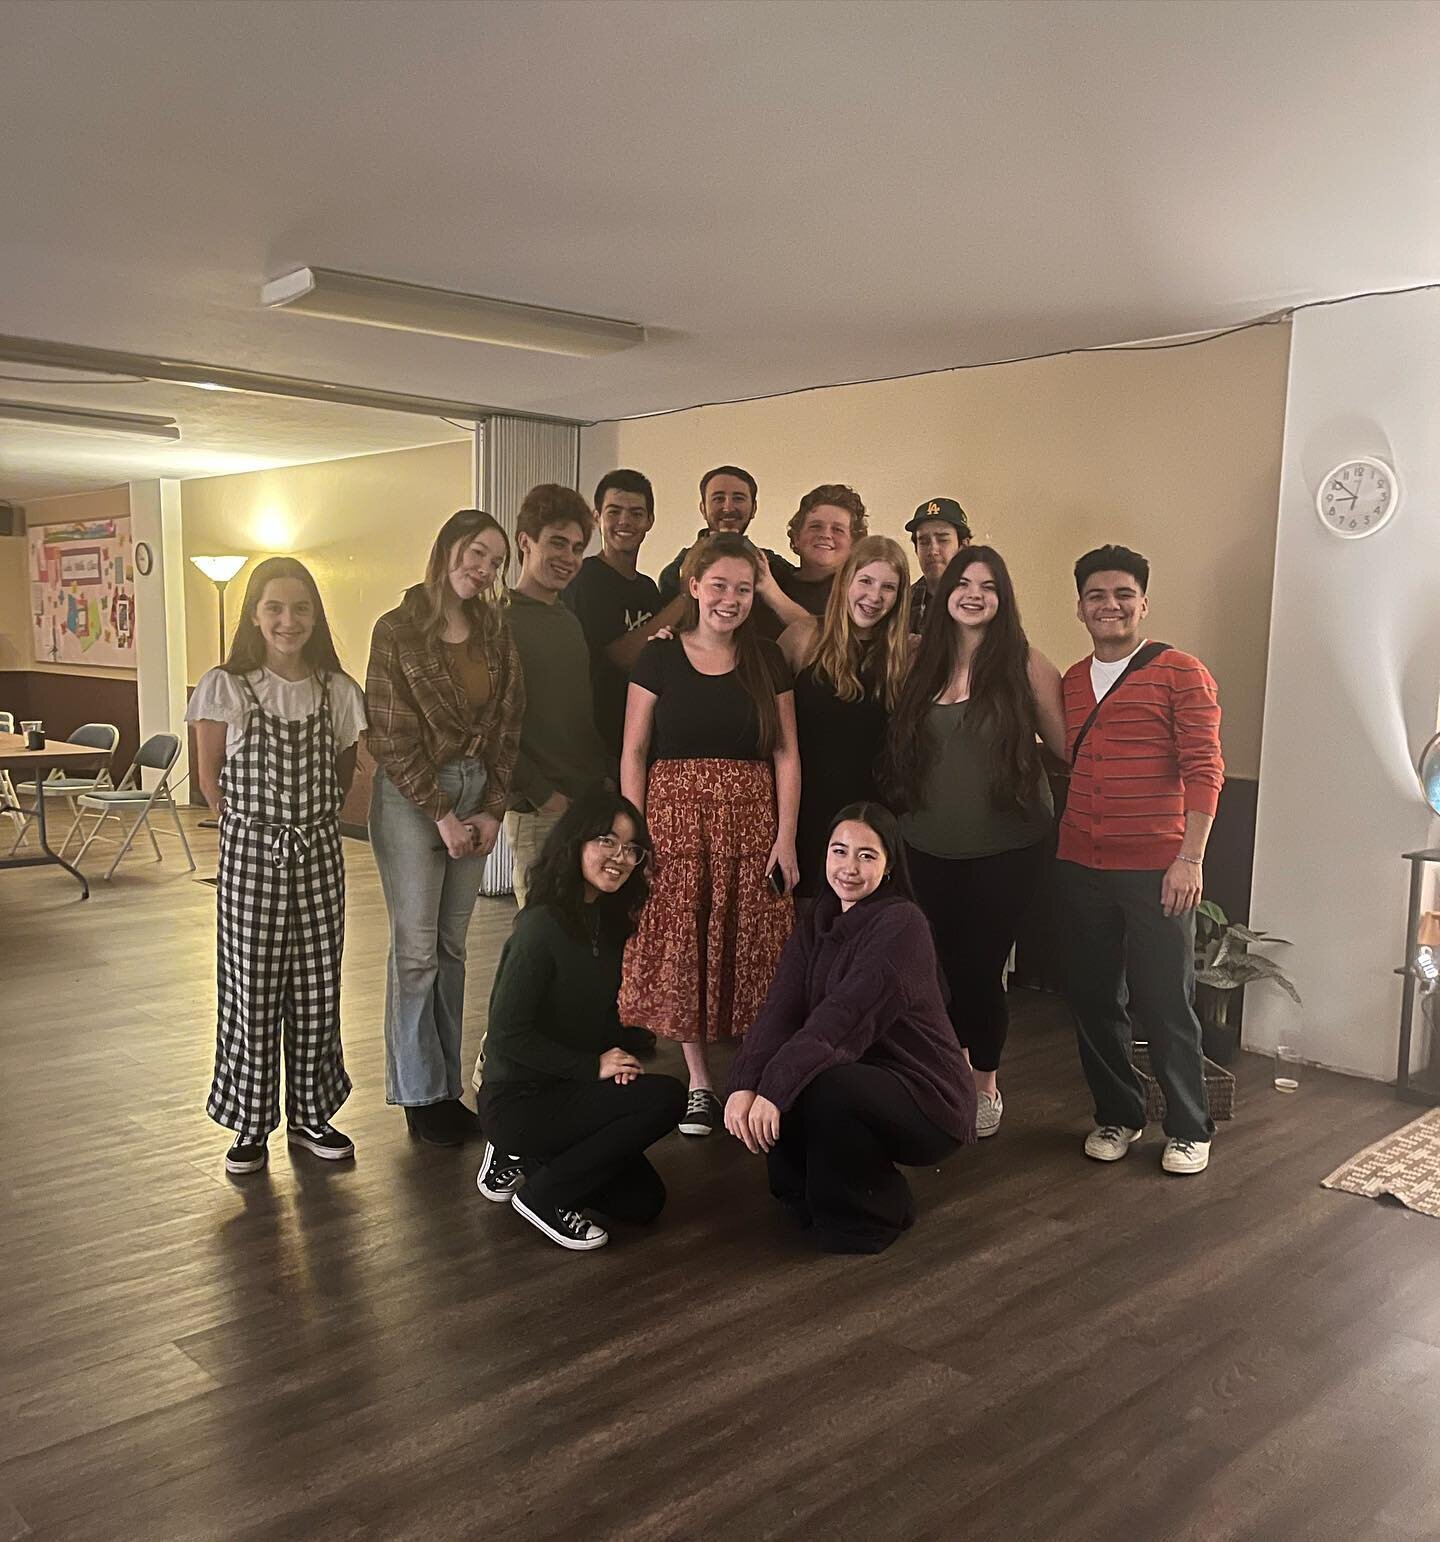 𝐅𝐫𝐢𝐞𝐧𝐝𝐬𝐠𝐢𝐯𝐢𝐧𝐠 𝐃𝐢𝐧𝐧𝐞𝐫 𝐏𝐚𝐫𝐭𝐲

The youth had such an amazing time hanging out and celebrating friendship together last Saturday. We are so grateful for each and every one of you, old friends and new. Thank you for being so specia